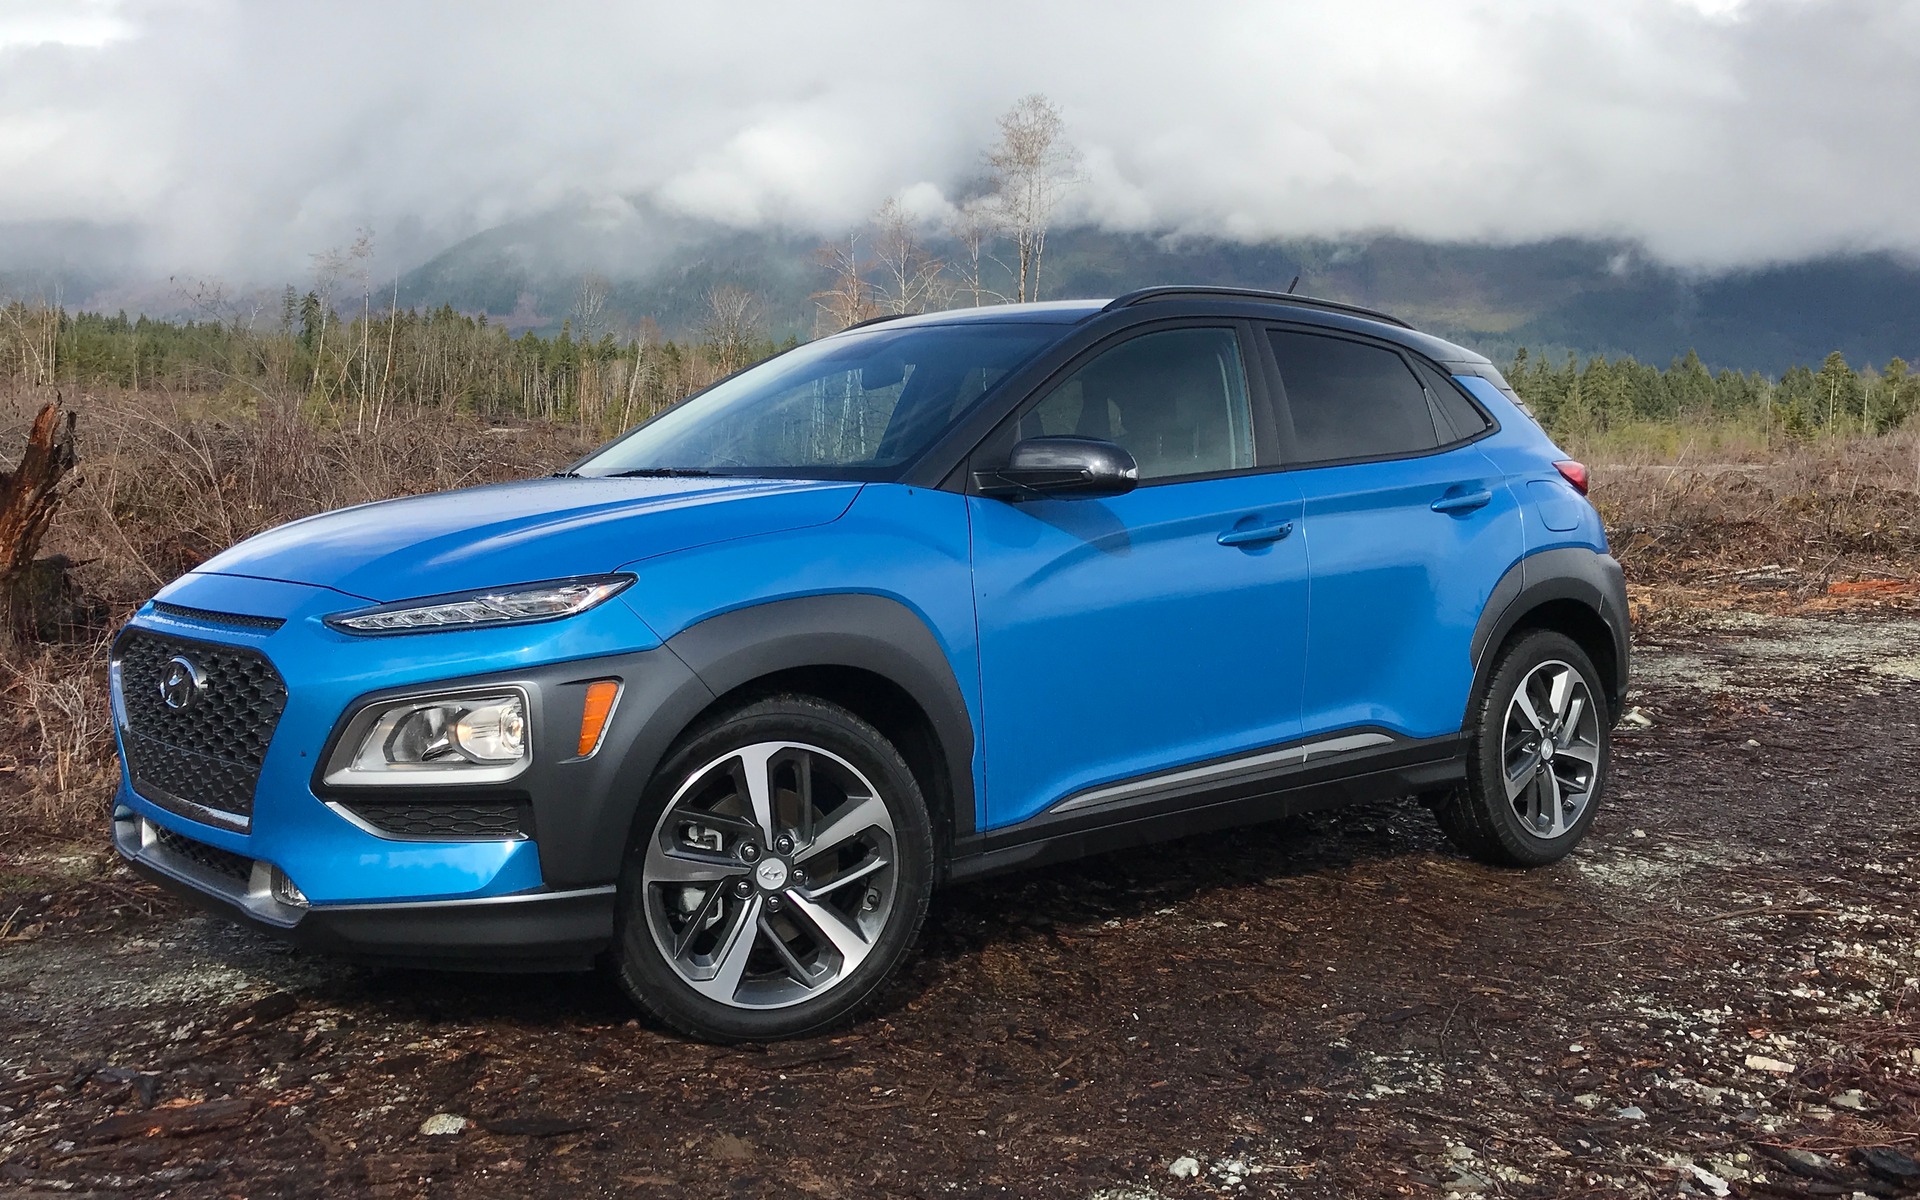 20 Hyundai Kona   News, reviews, picture galleries and videos ...